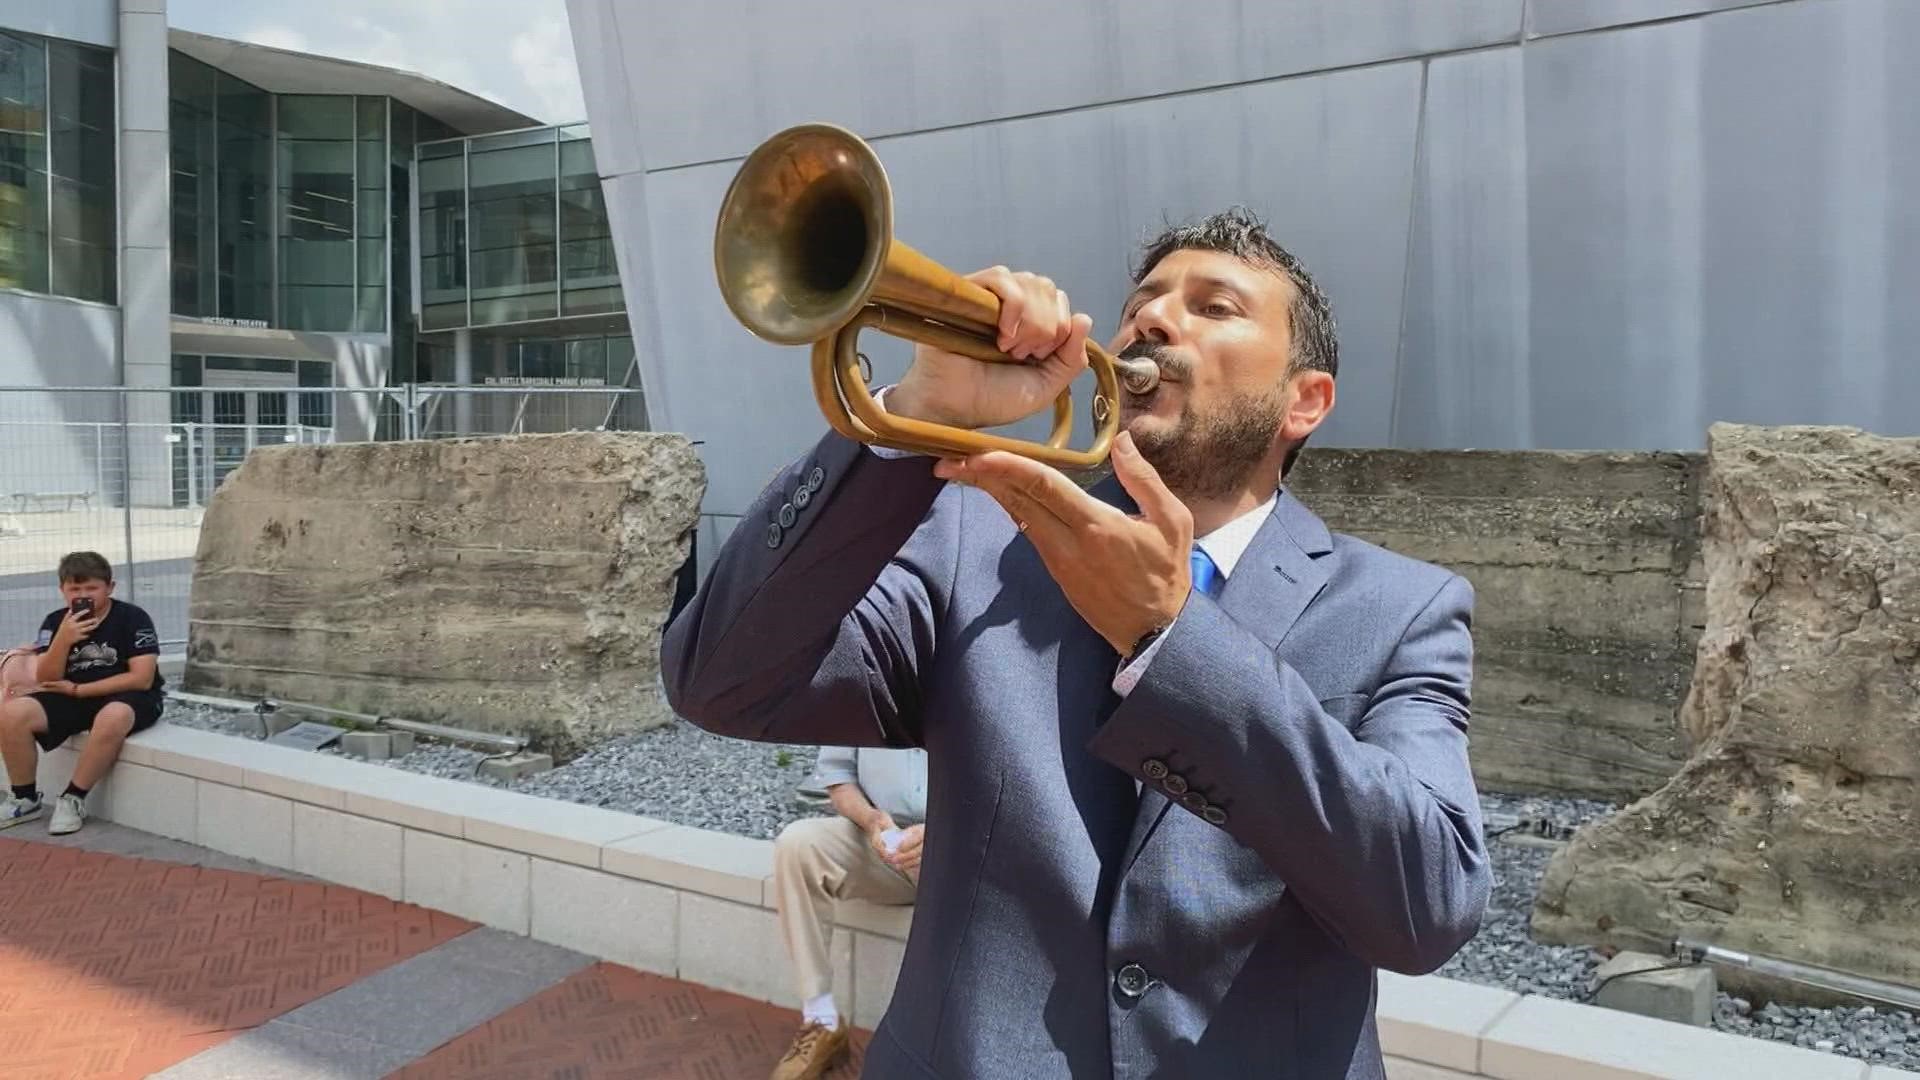 Jason Giaccone spends his days teaching music to Jesuit students. At night he plays gigs, but two years ago he decided to do something different with his talent.